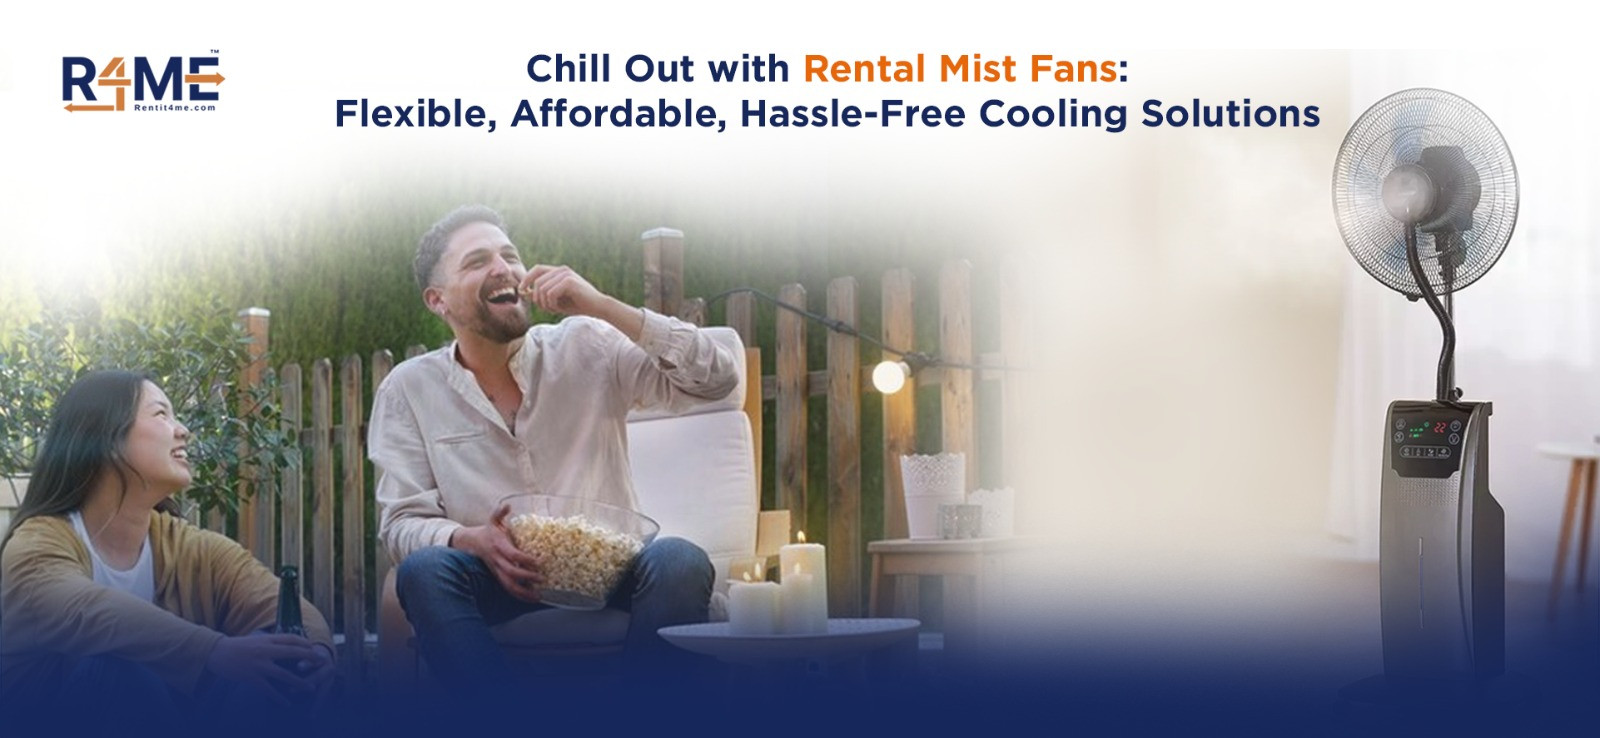 Chill Out with Rental Mist Fans: Flexible, Affordable, Hassle-Free Cooling Solutions